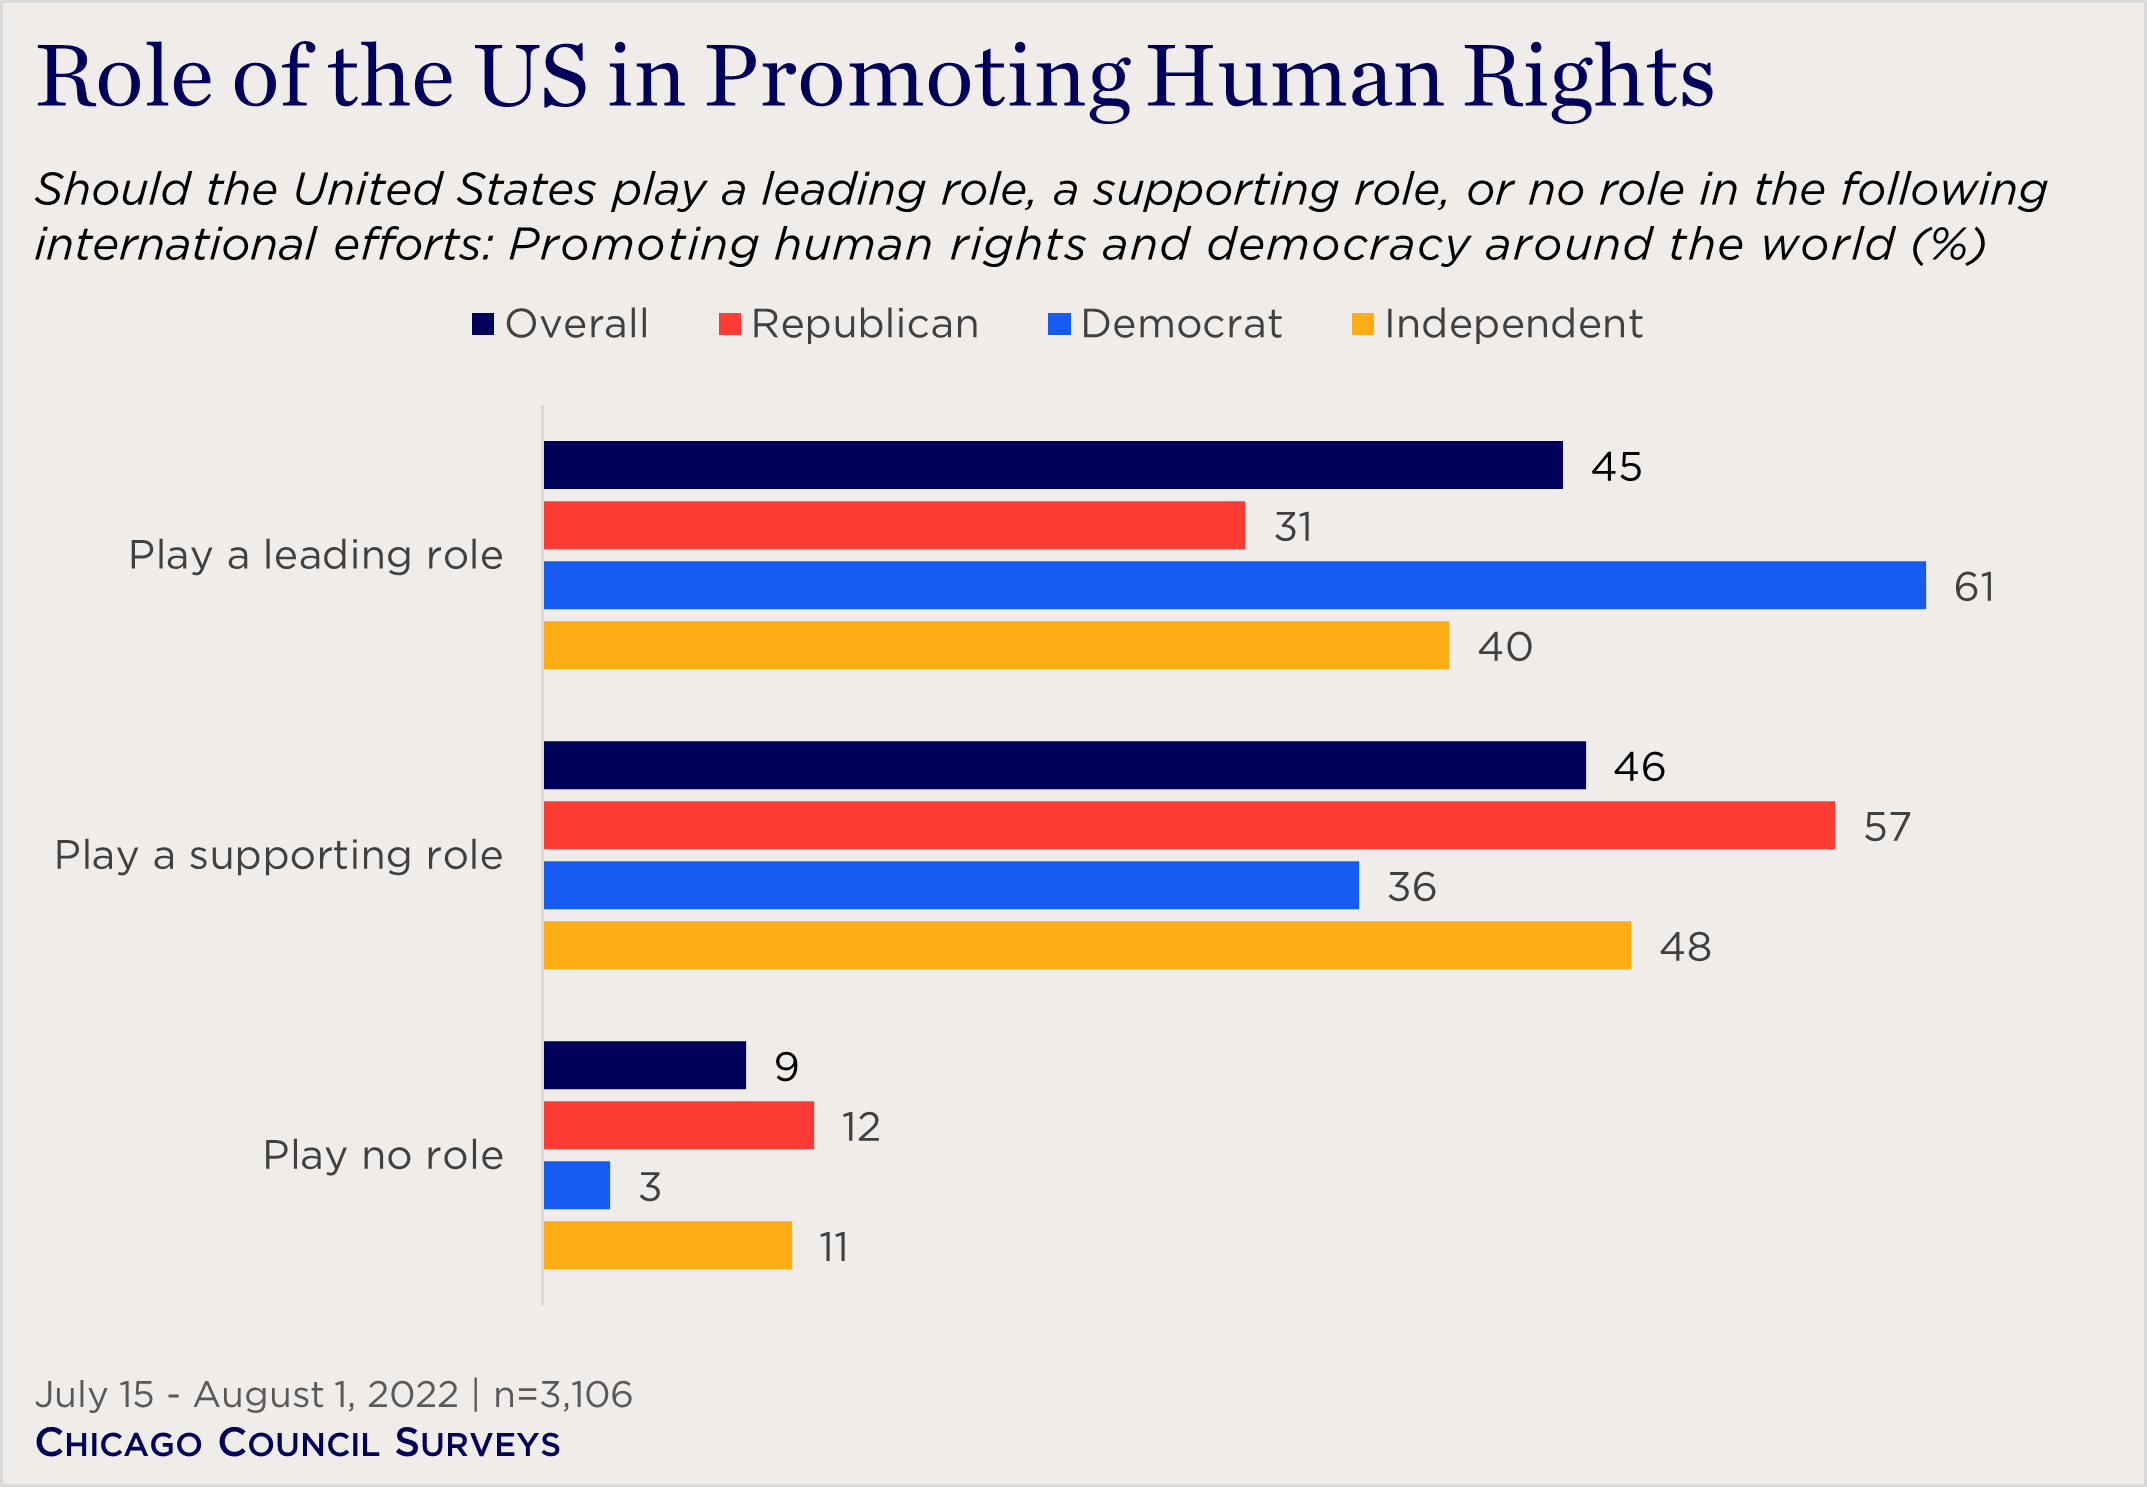 "bar chart showing partisan views on the role of the US in promoting human rights"